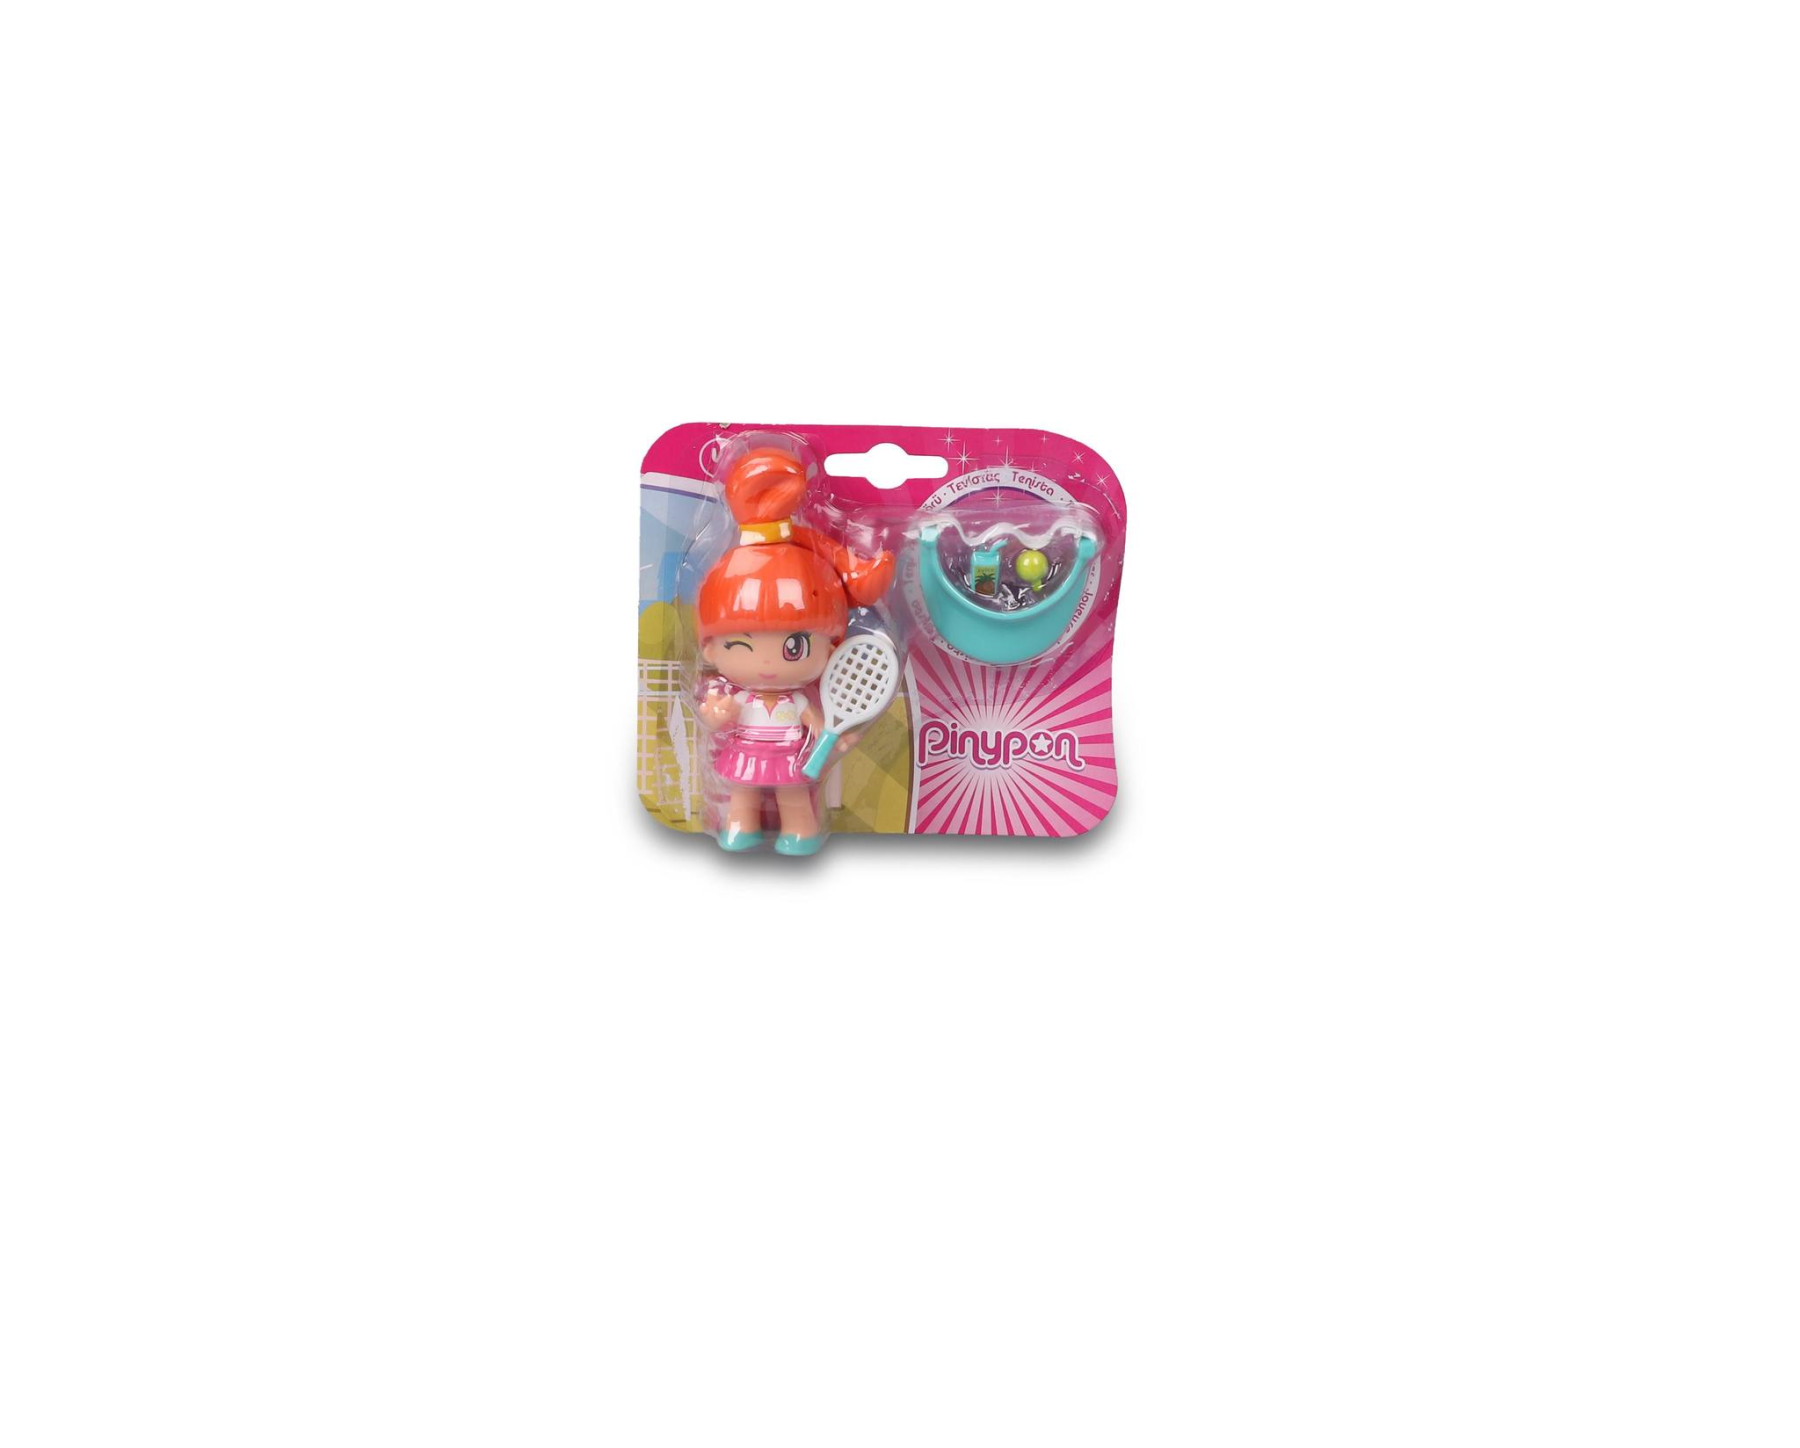 Pinypon Fairies by Famosa - Play on Words